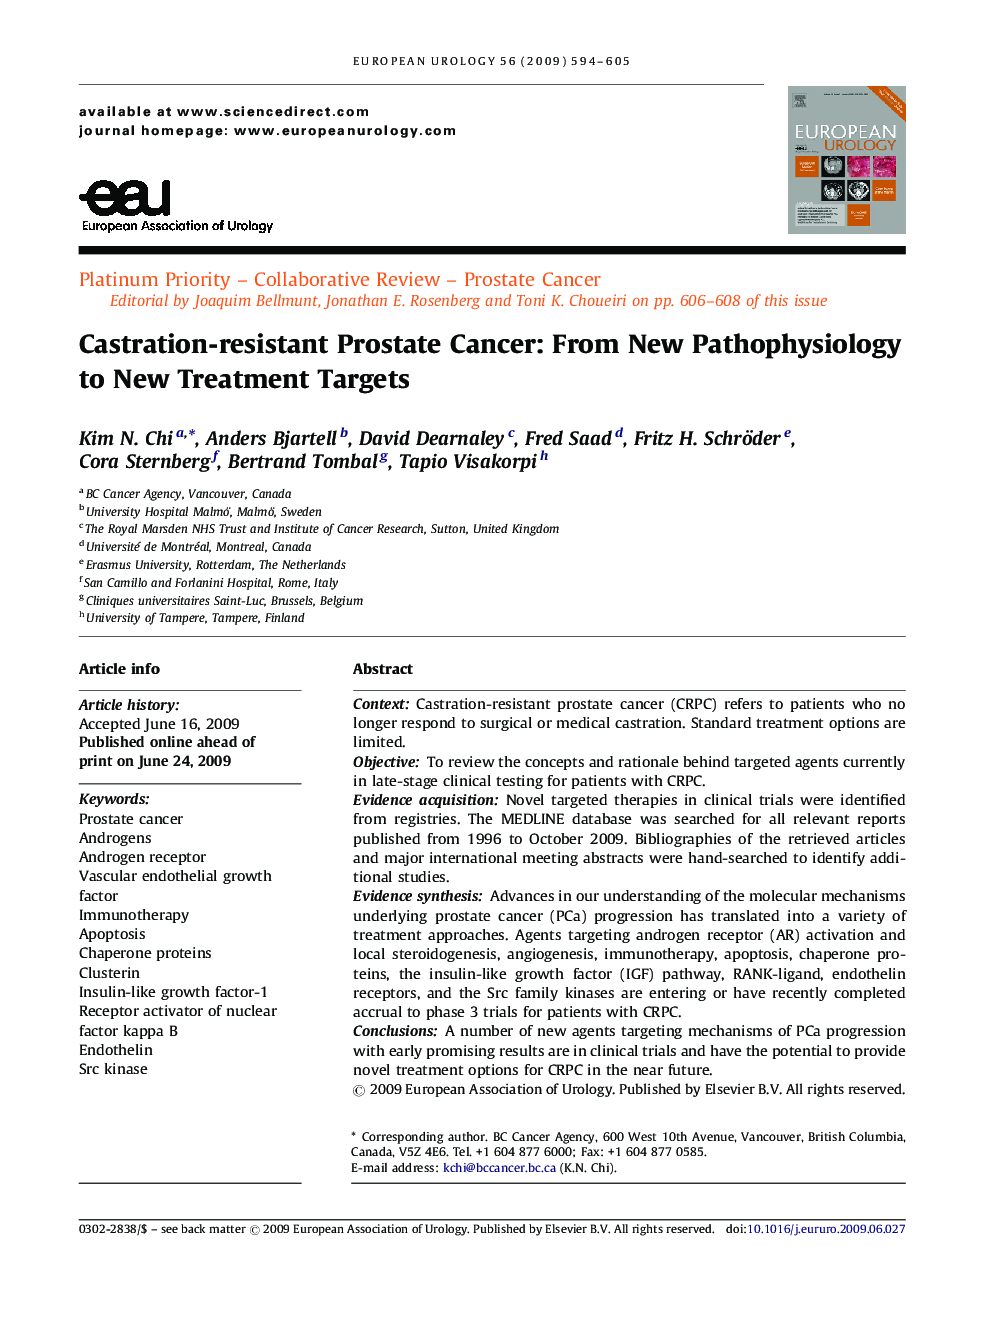 Castration-resistant Prostate Cancer: From New Pathophysiology to New Treatment Targets